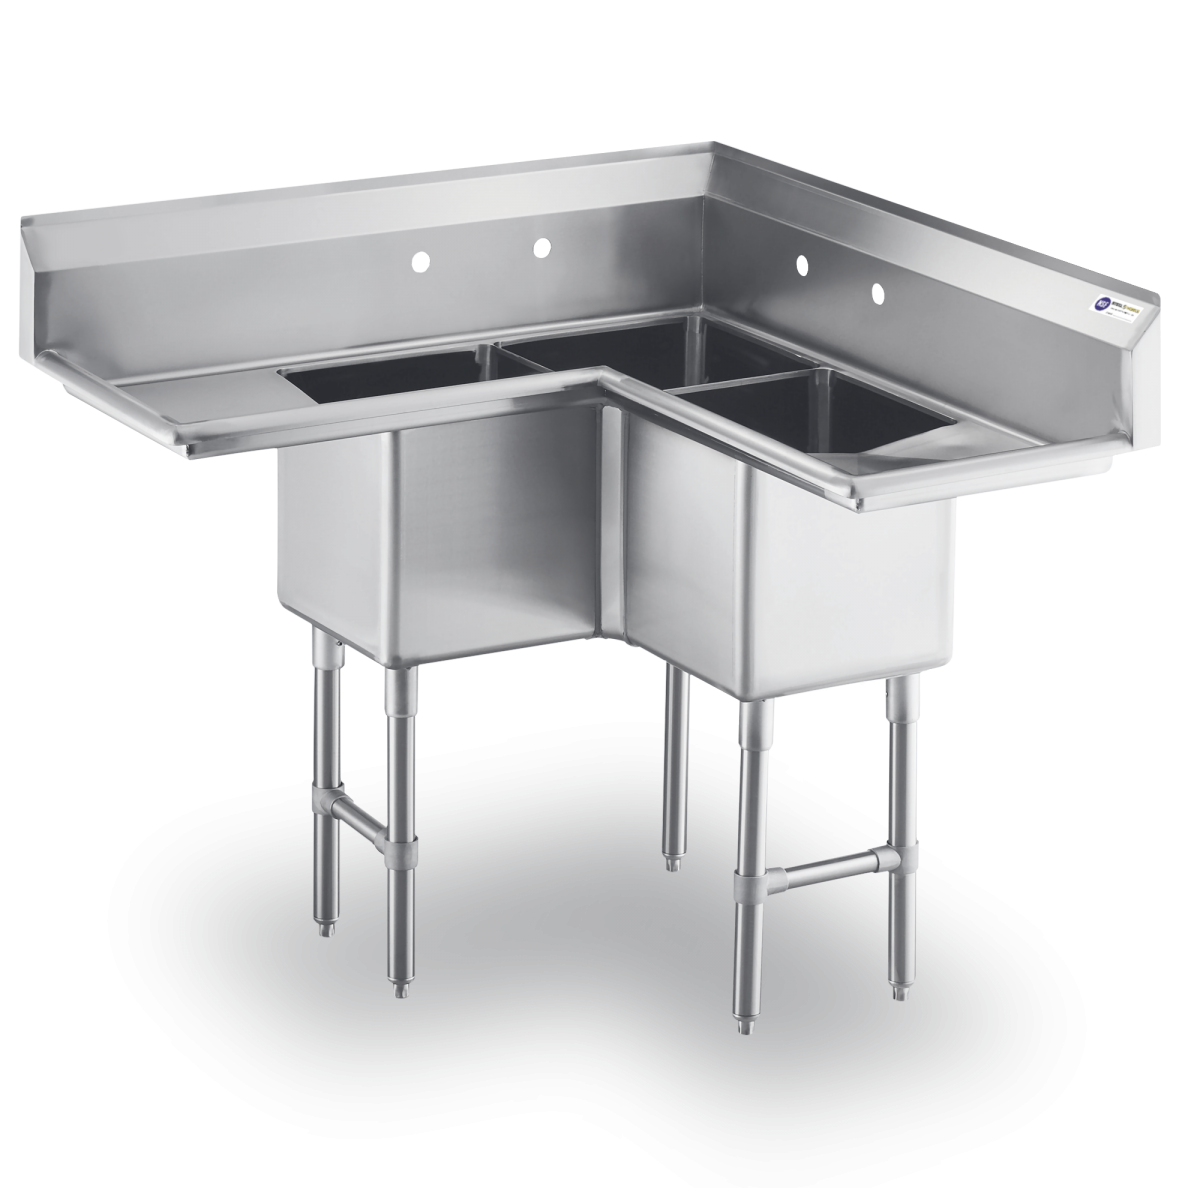 18 Gauge Stainless Steel Three Compartment Corner Sink With Two 14" Drainboards